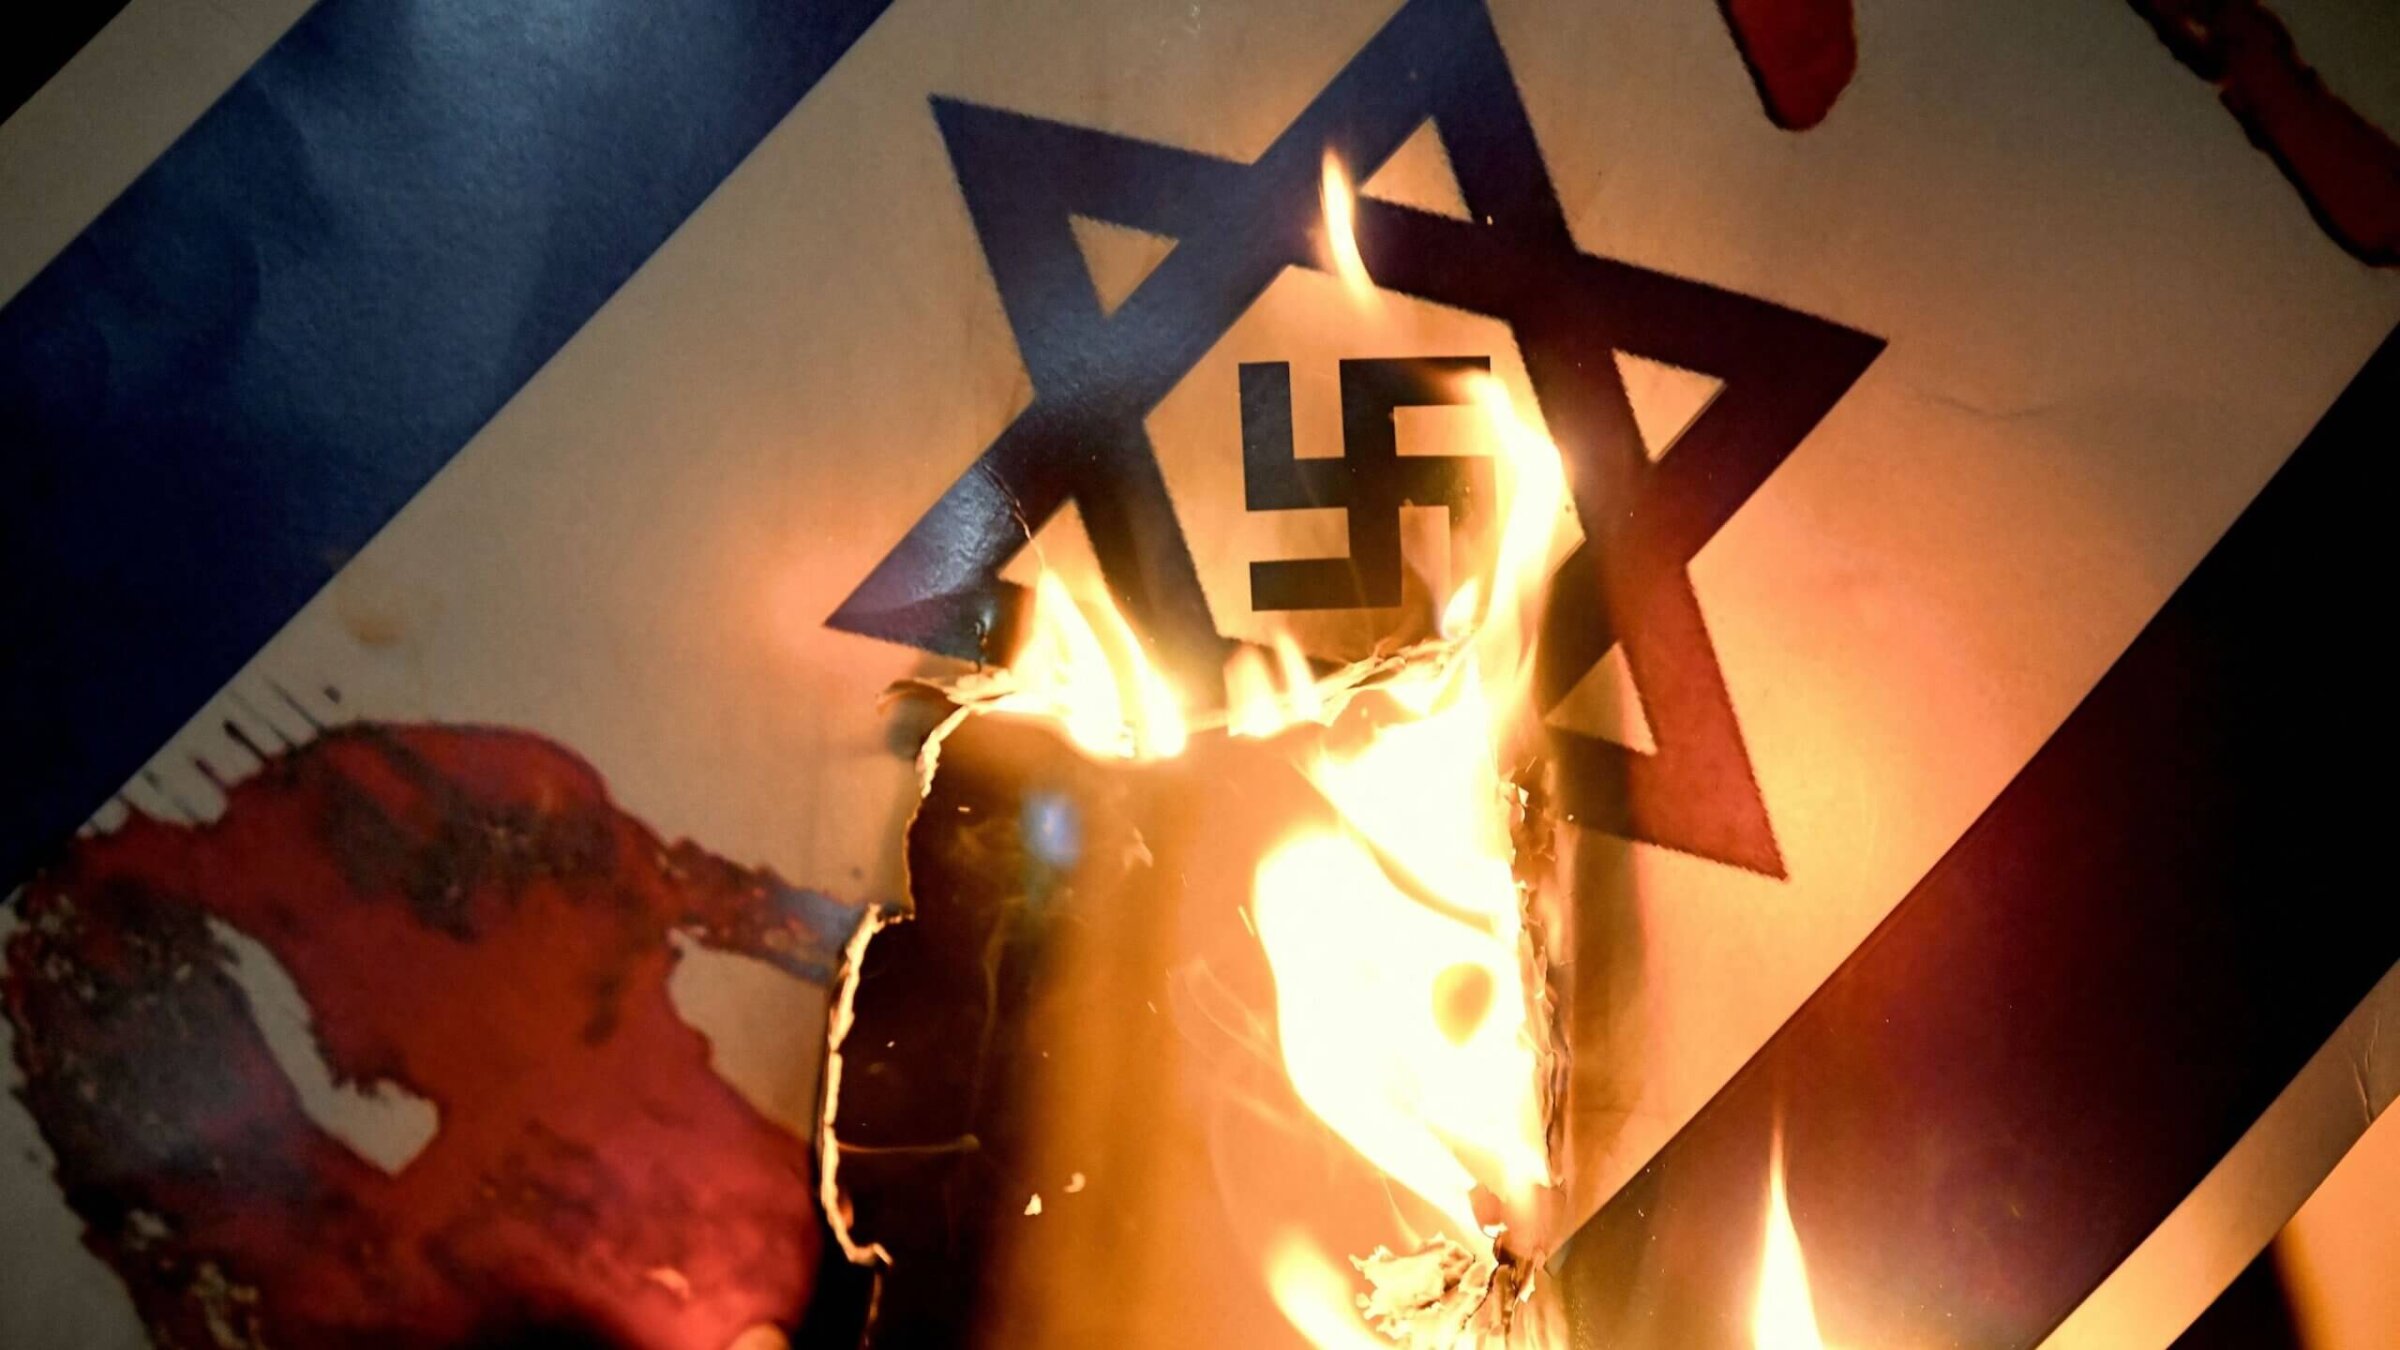 Protesters burned a placard representing an Israeli flag with a Nazi swastika inside the Star of David during a rally in support of Palestinians outside the Israeli Consulate in Istanbul earlier this month. 